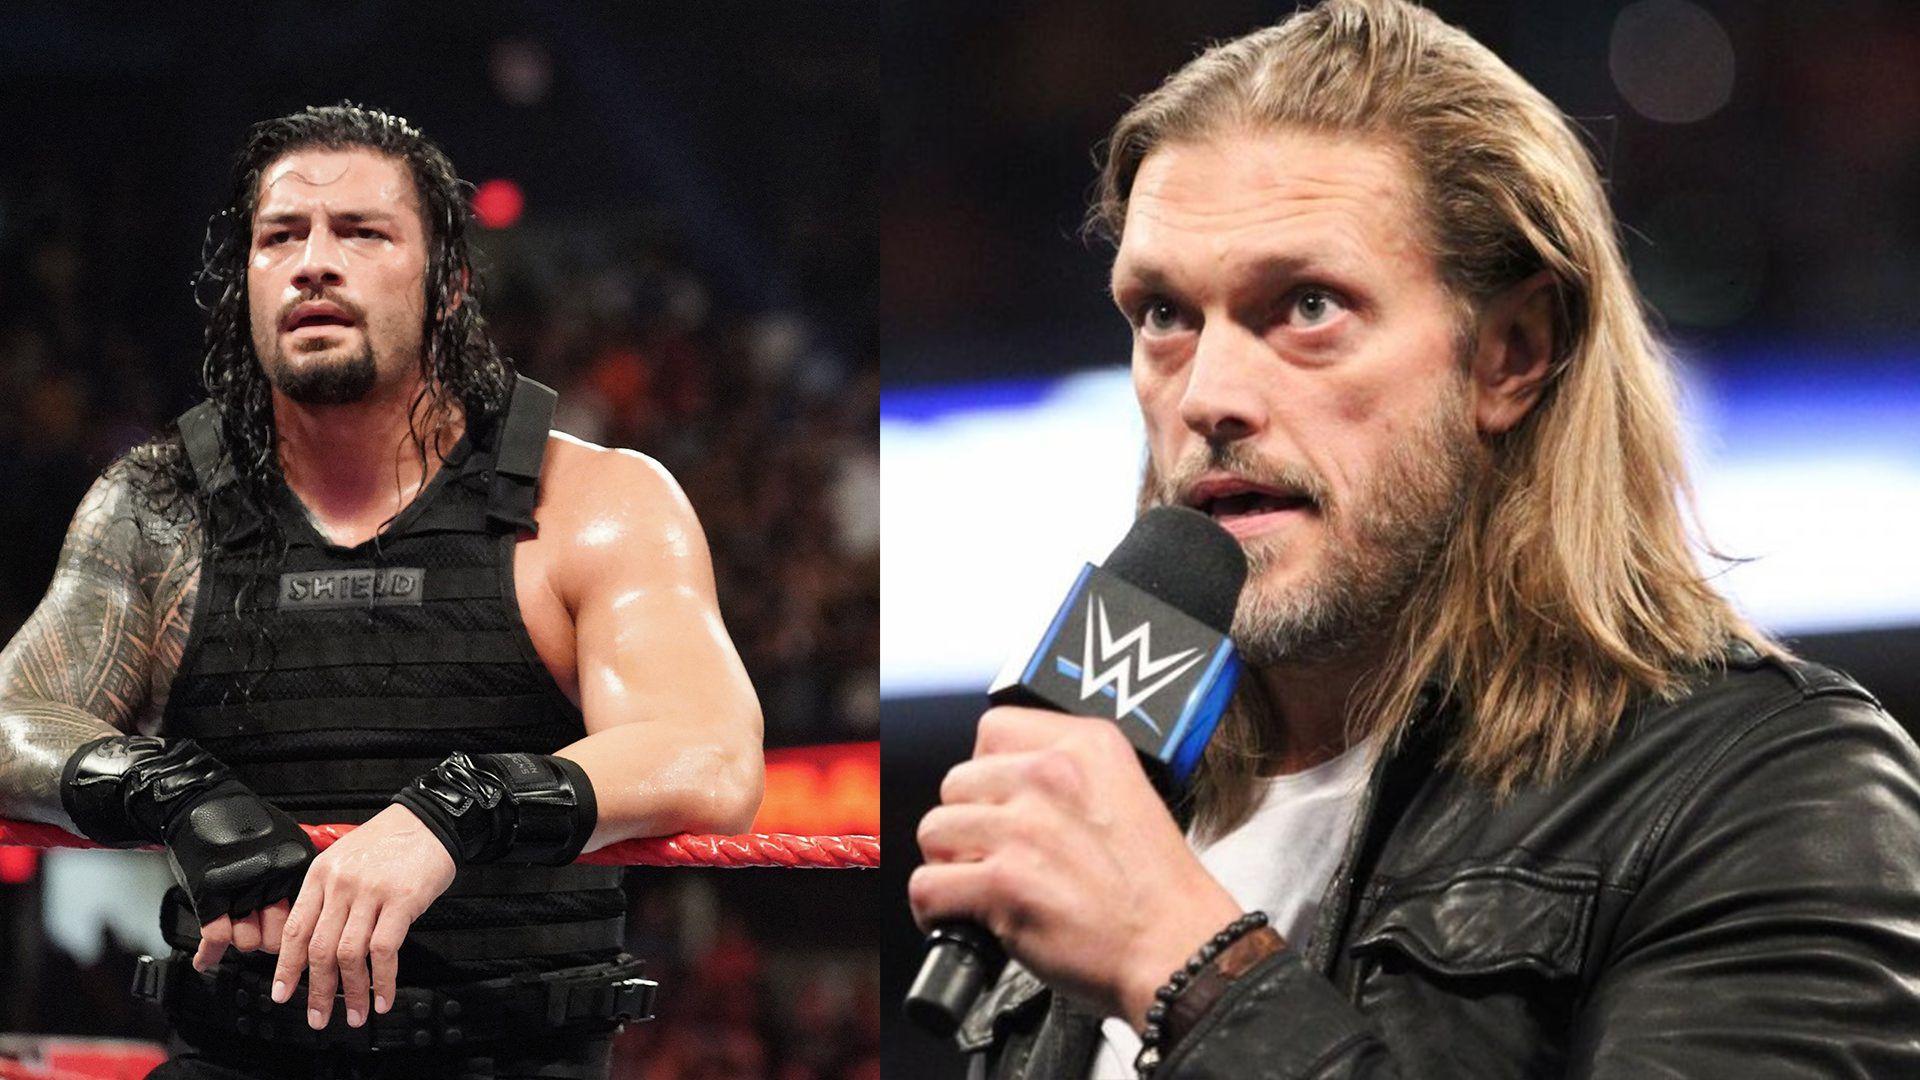 Edge gives his thoughts on Roman Reigns' medical condition